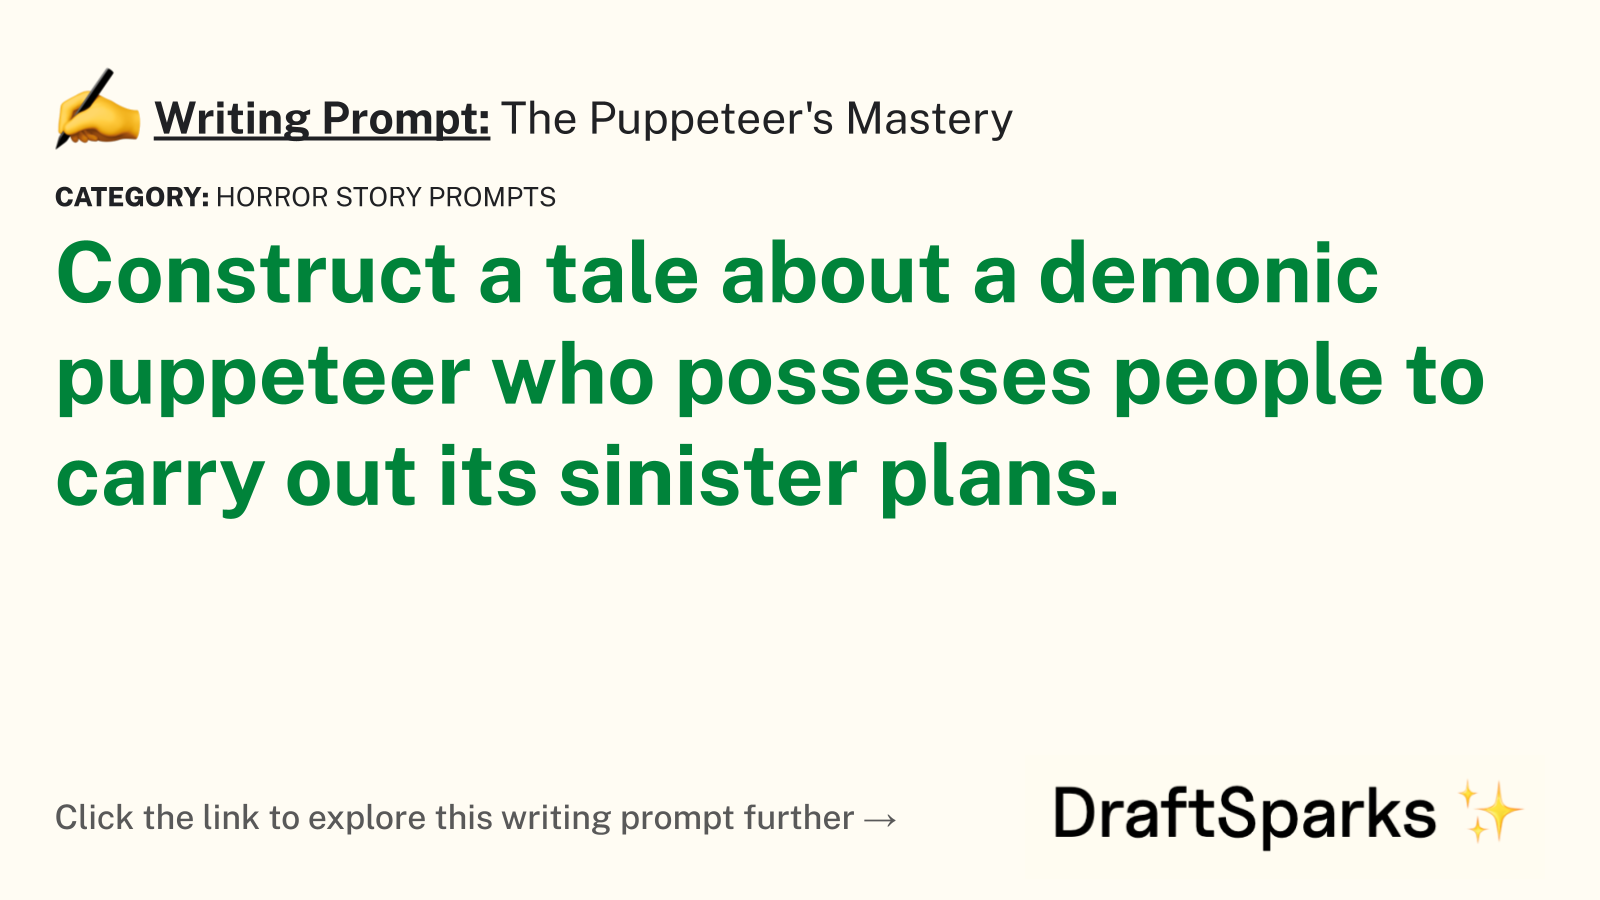 The Puppeteer’s Mastery